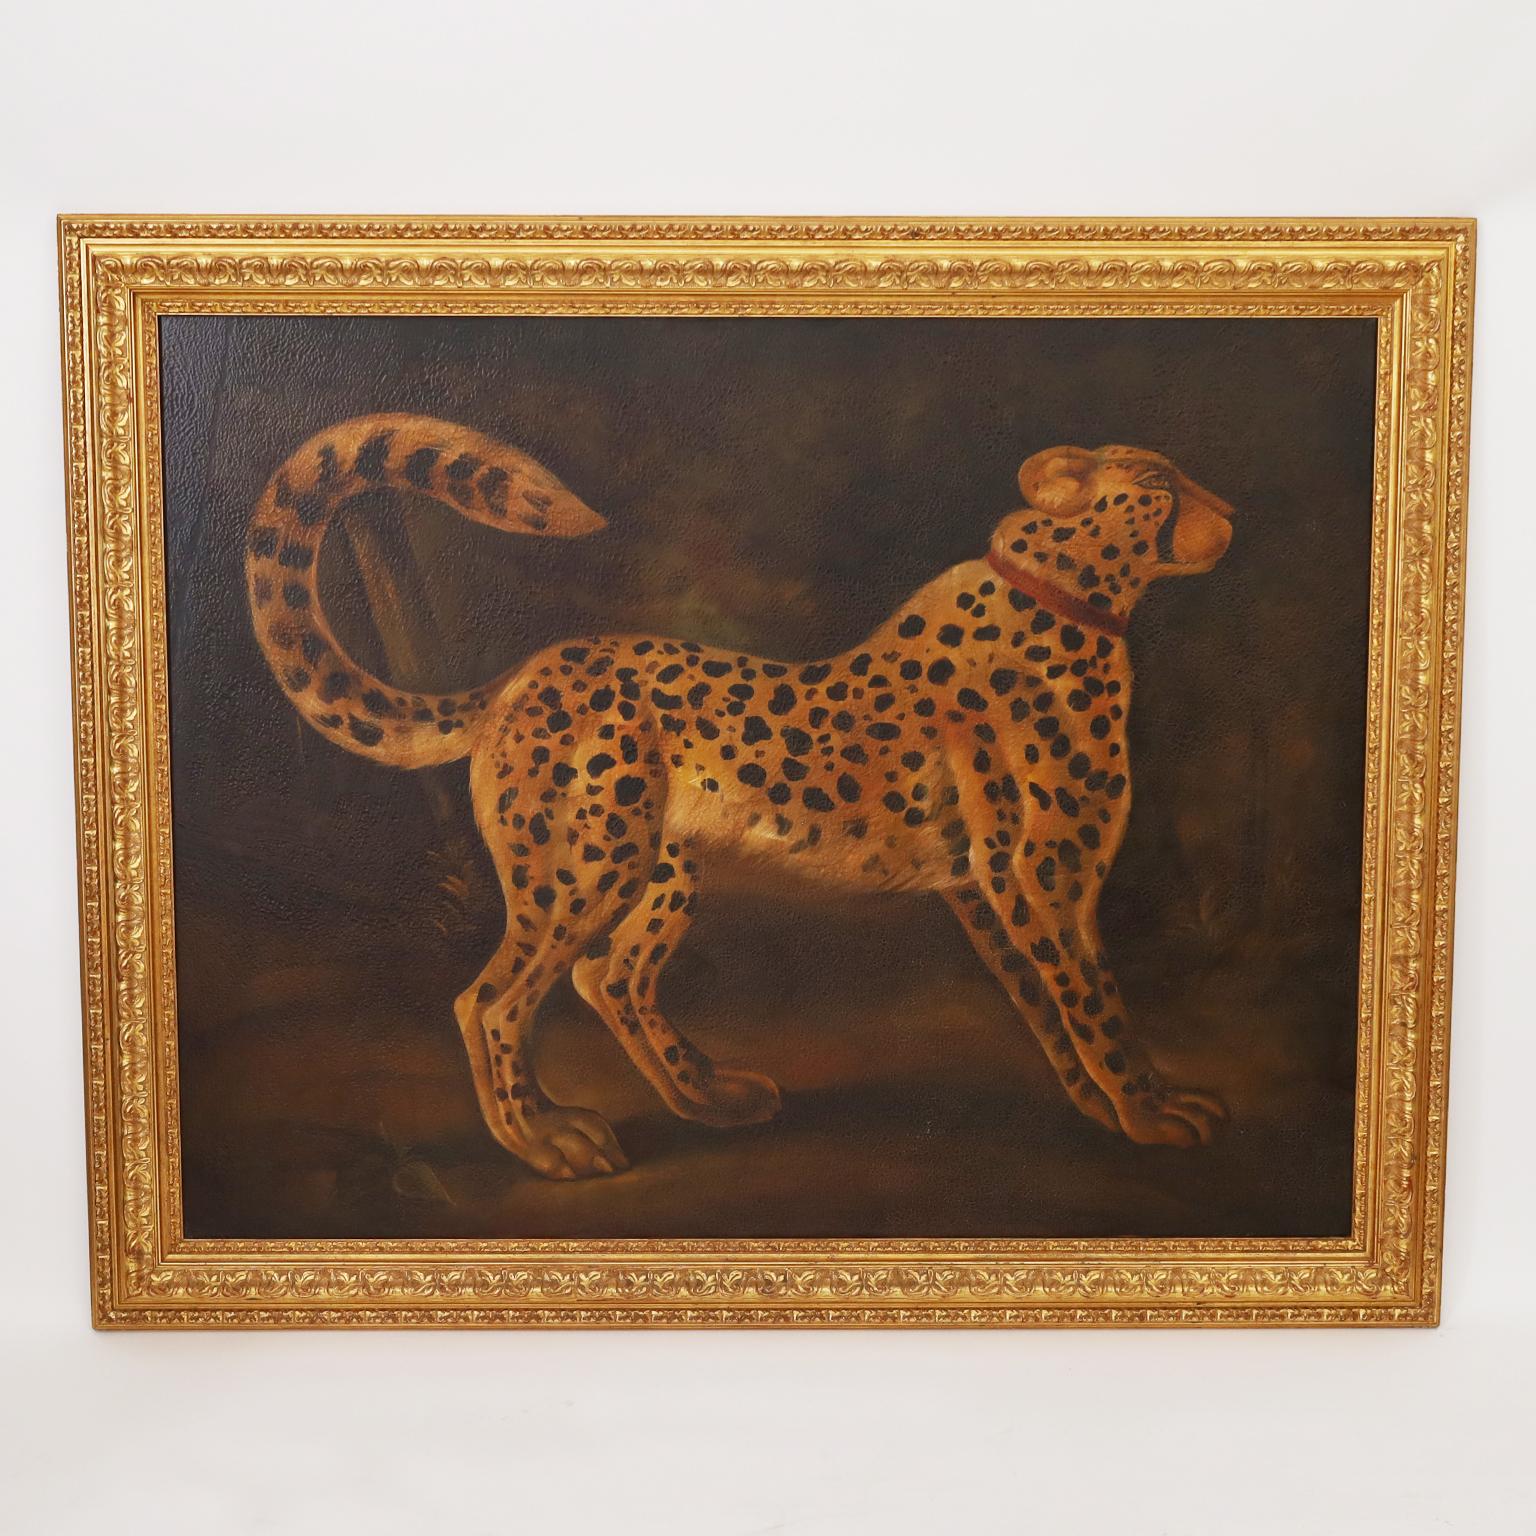 Unknown Animal Painting - Reginald Baxter Vintage Oil Painting on Canvas of a Cheetah or Leopard